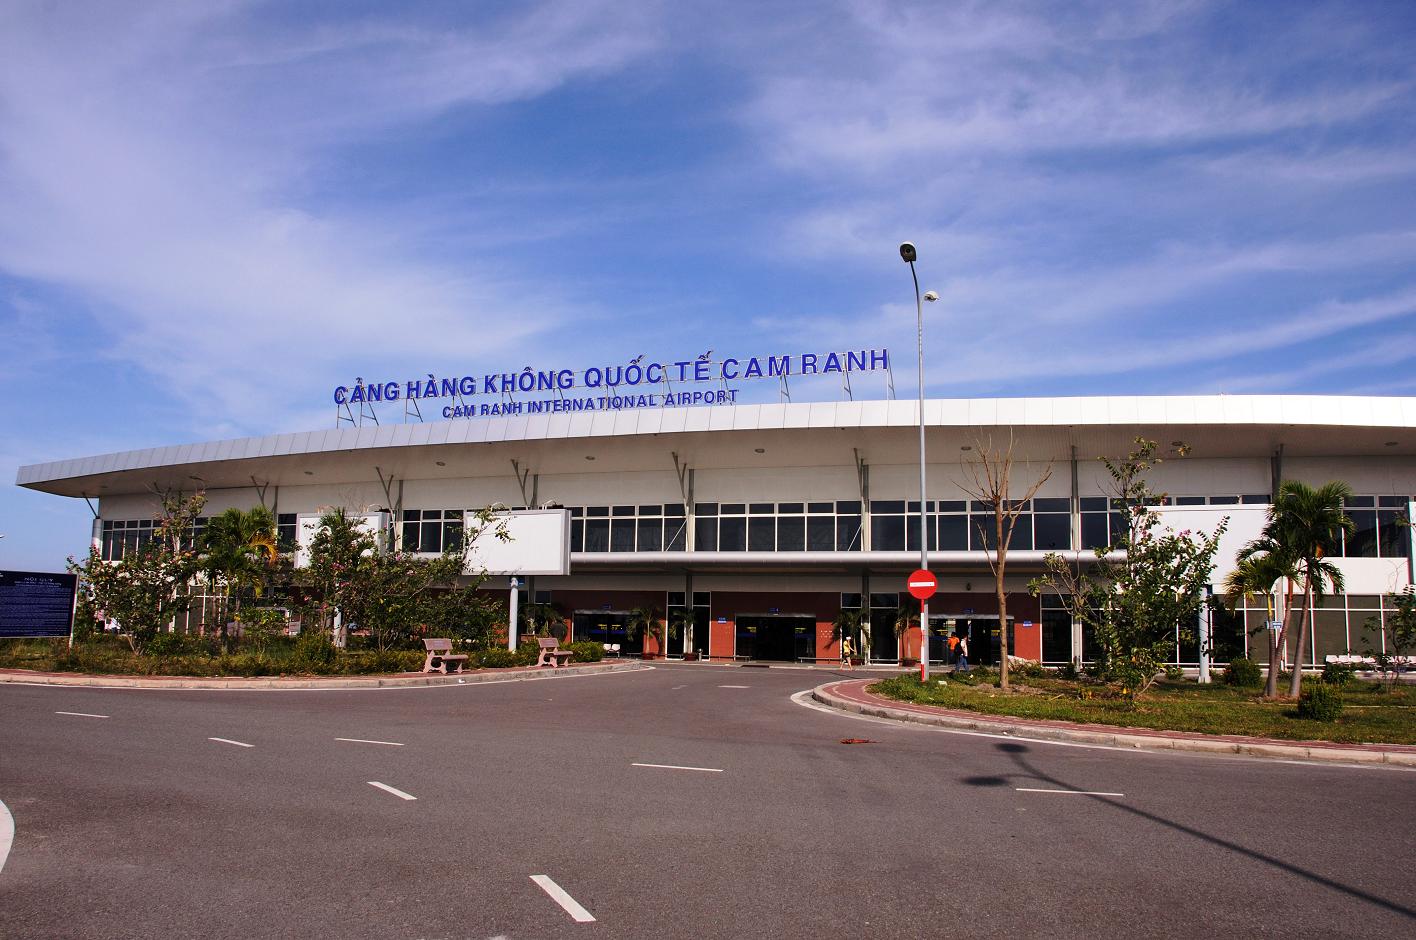 Which Kind Of Visa To Enter Vietnam Through Cam Ranh Airport (Nha Trang City) And How To Get It?